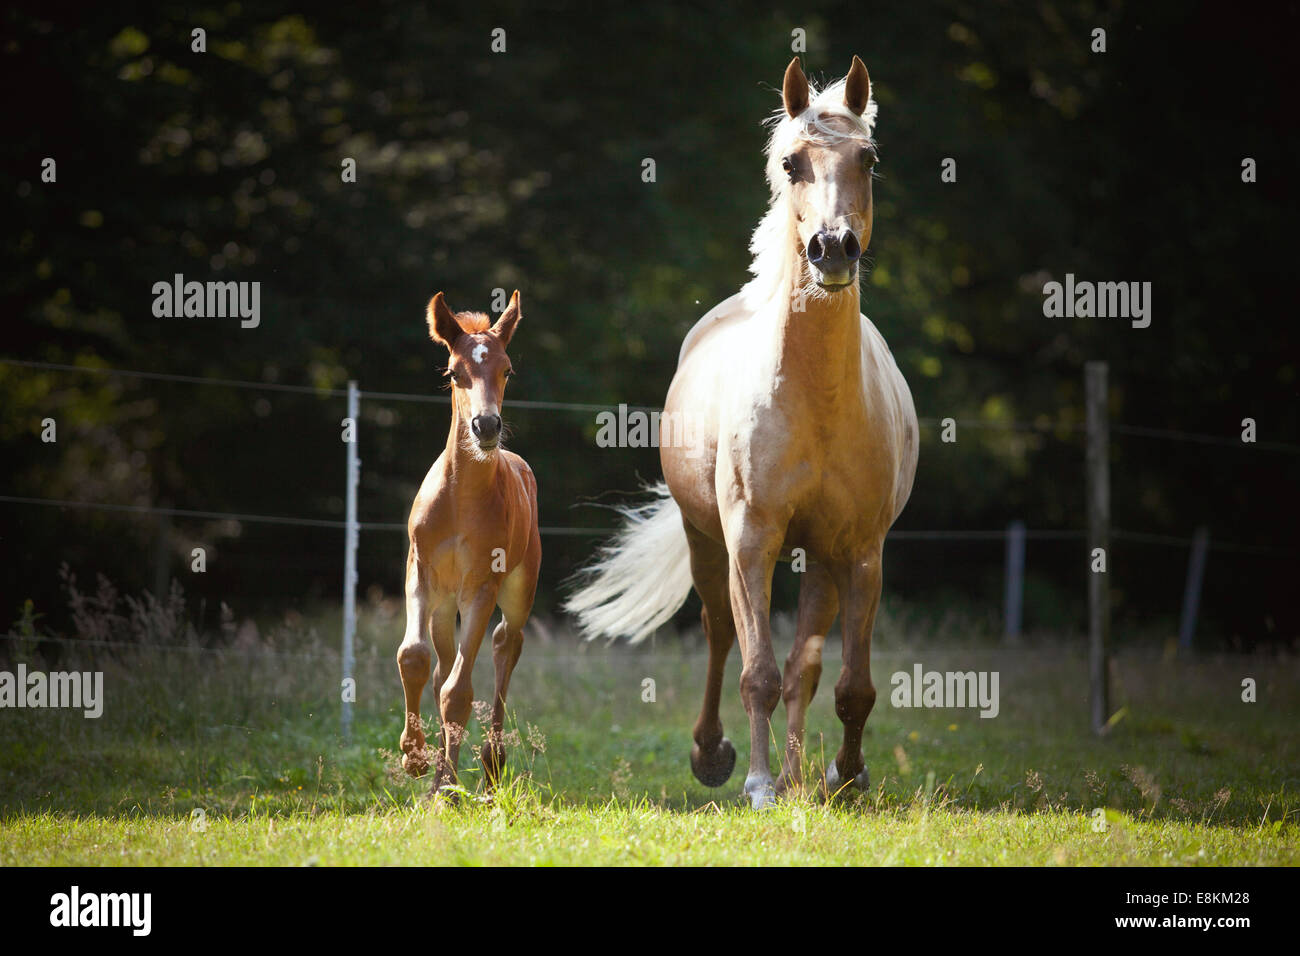 Mare with colt, 3 weeks, German small horse X P.R.E. and German small horse galloping on meadow Stock Photo